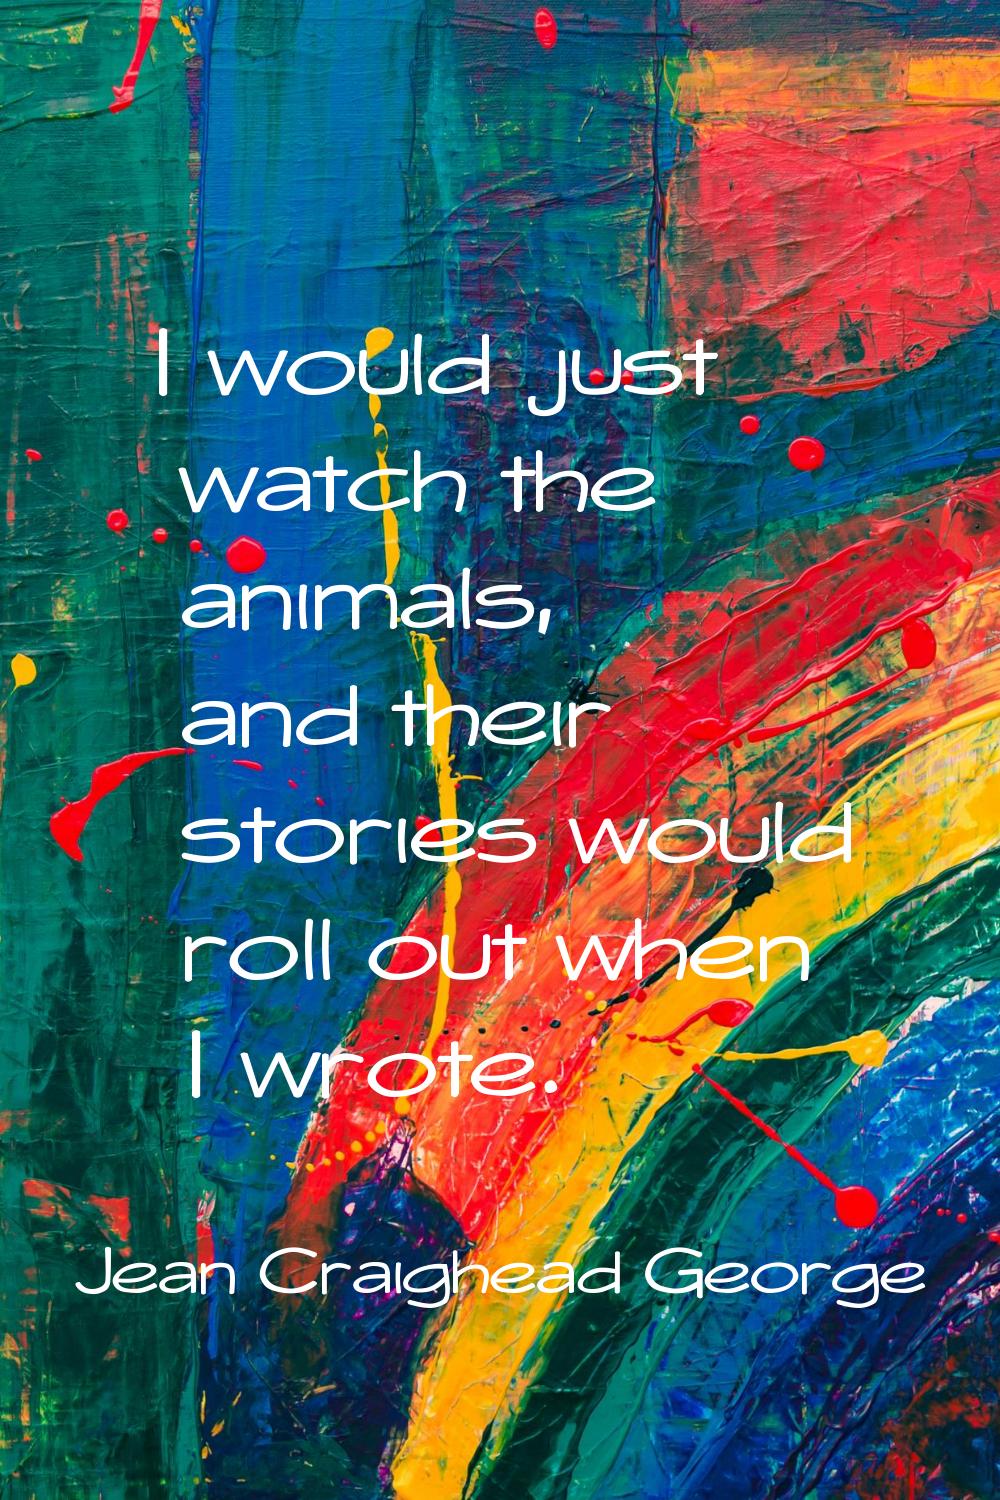 I would just watch the animals, and their stories would roll out when I wrote.